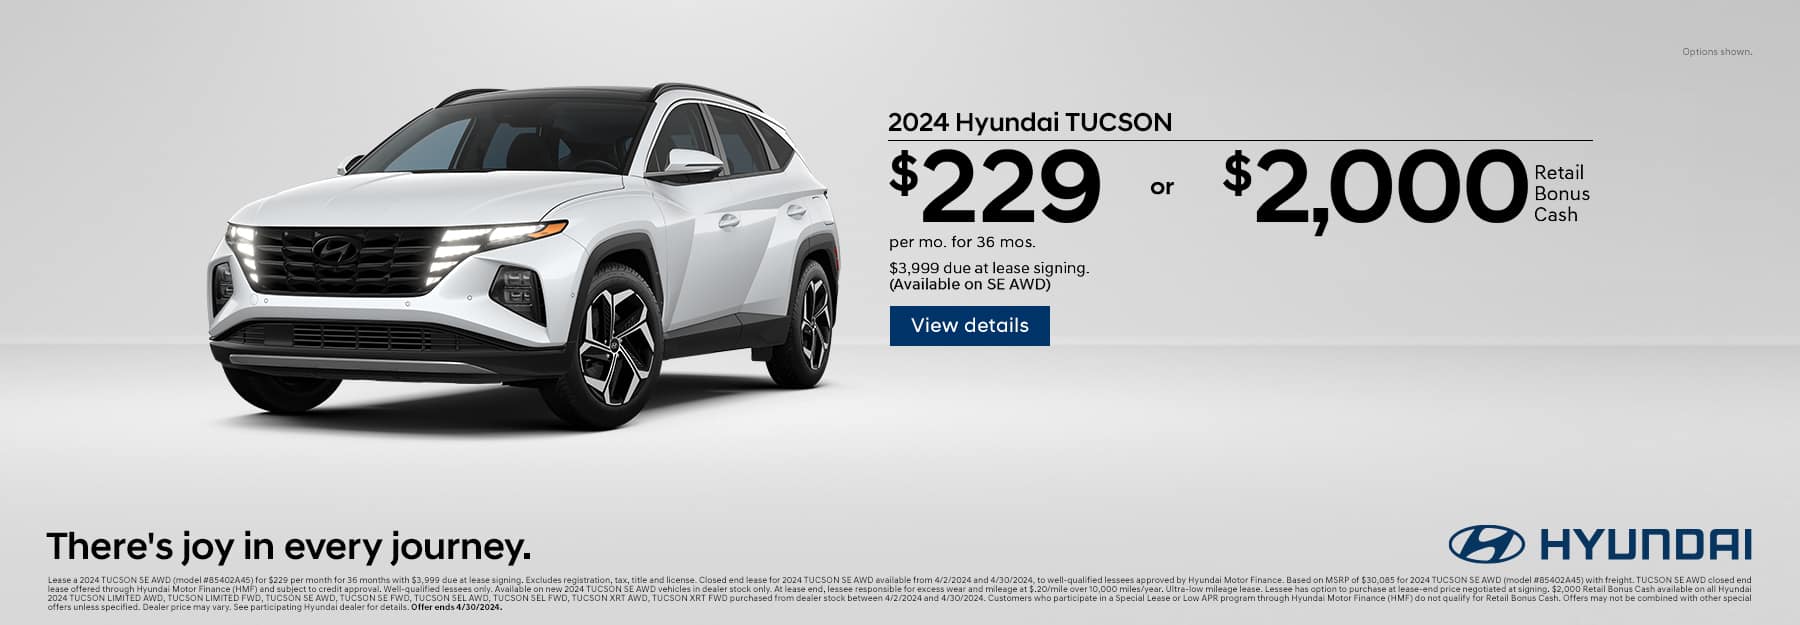 2024 Hyundai Tucson and 2023 Hyundai Santa Fe - Get 0% APR for 60 Months + No Payments for 90 Days!